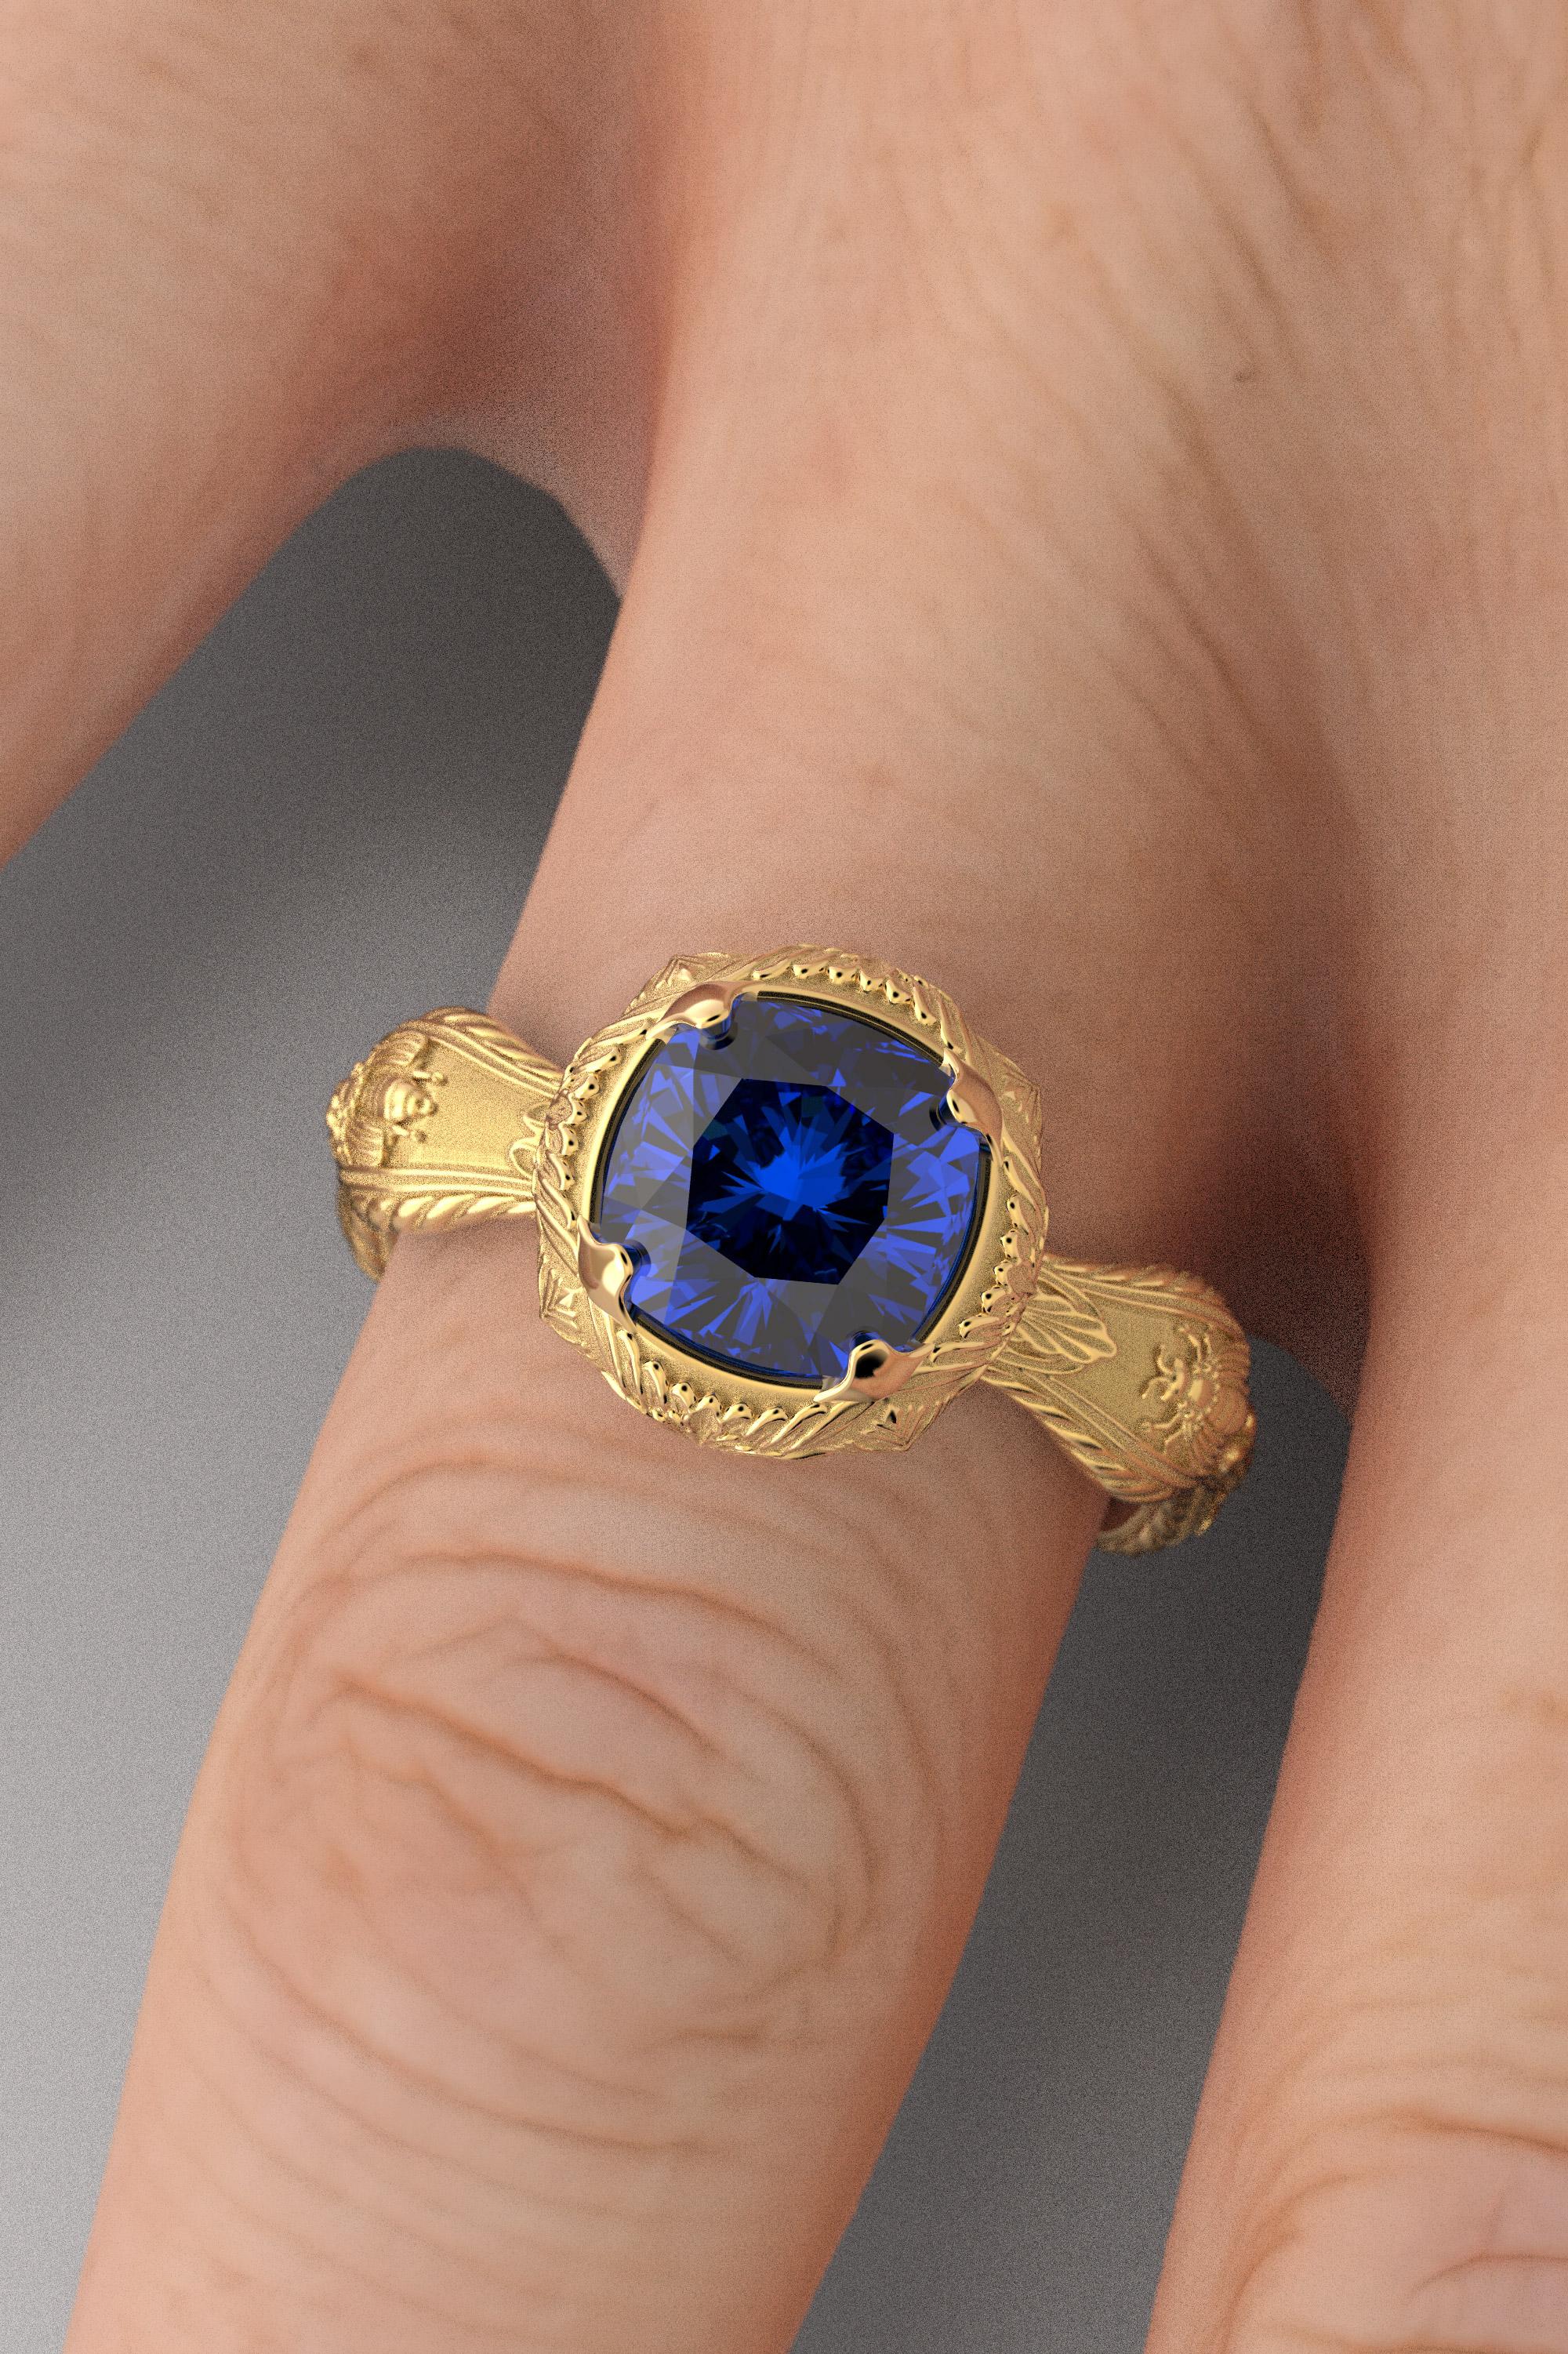 For Sale:  Tanzanite Ring Made In Italy by Oltremare Gioielli in 18k genuine gold 6